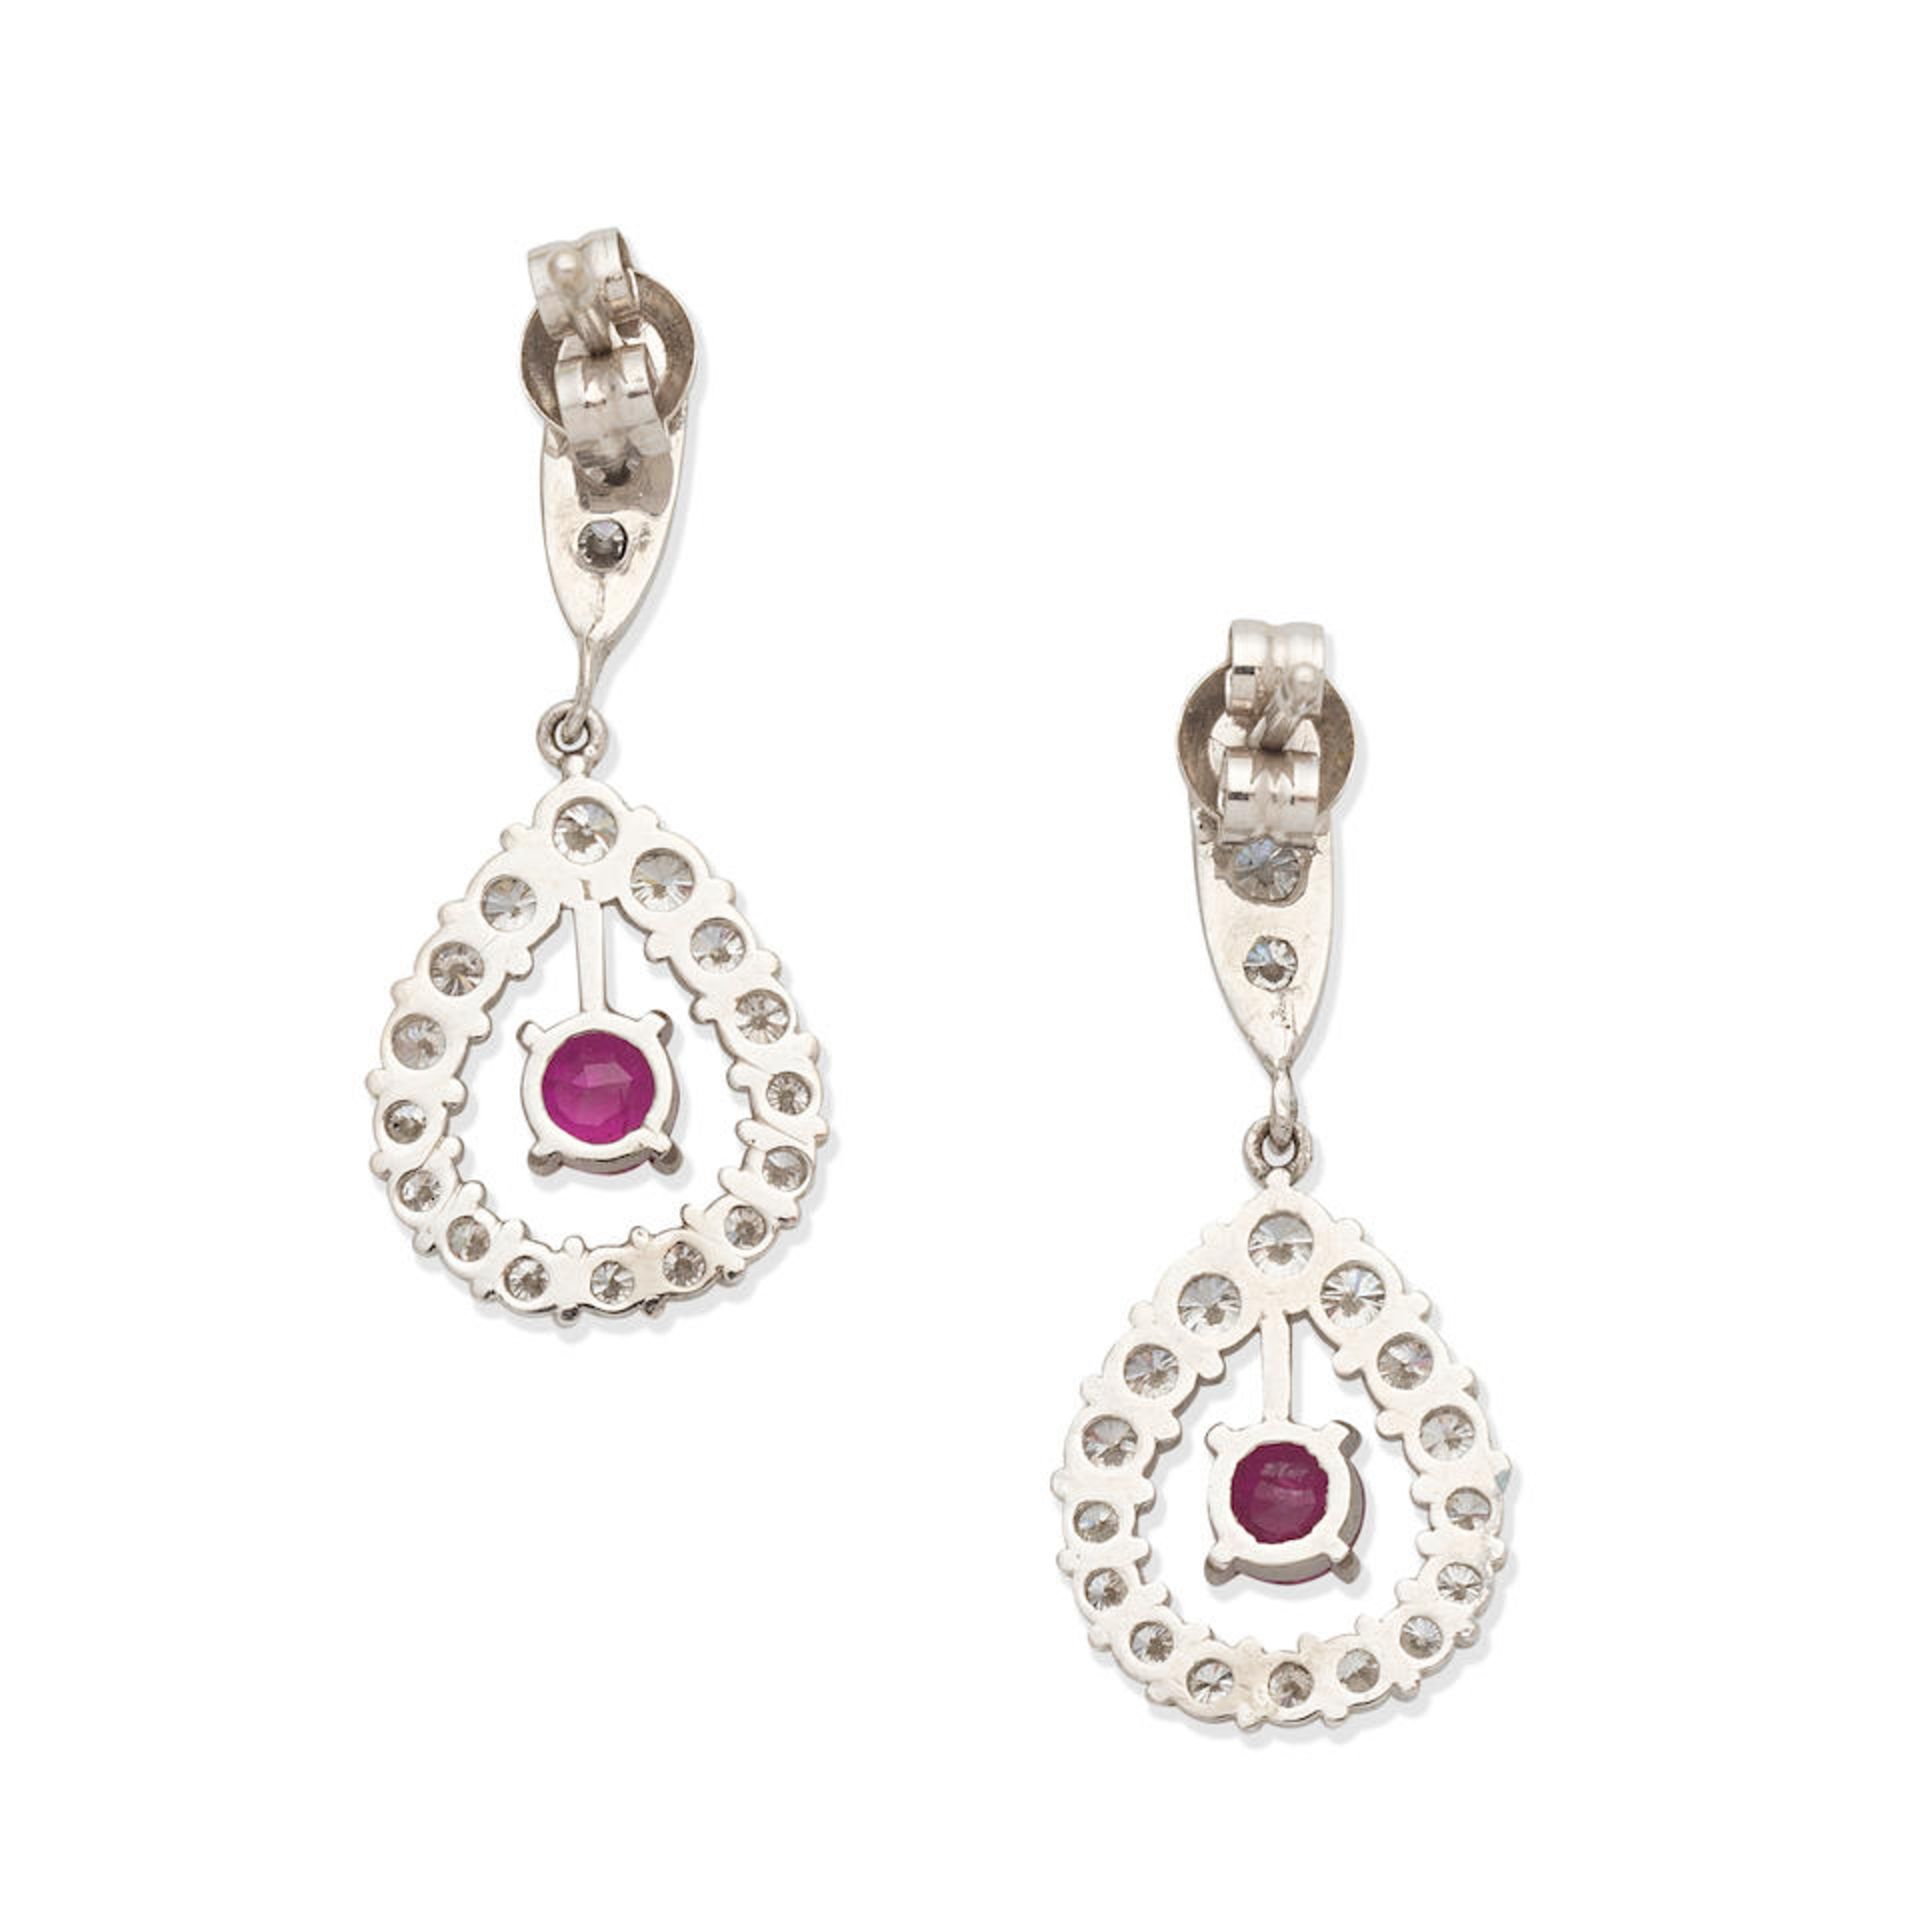 RUBY AND DIAMOND EARRINGS - Image 2 of 3